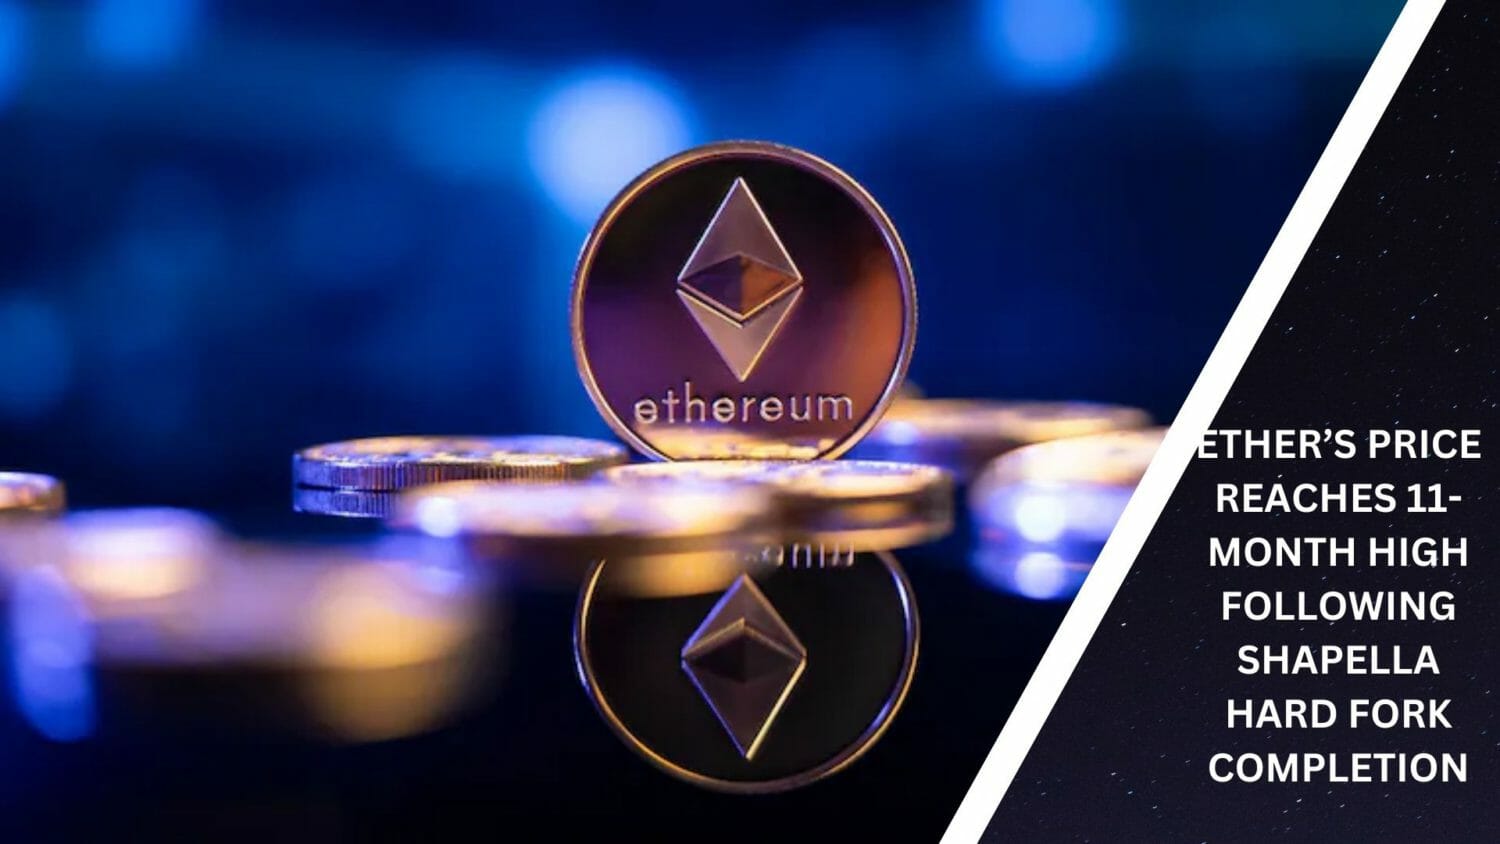 Ether’s Price Reaches 11-Month High Following Shapella Hard Fork Completion